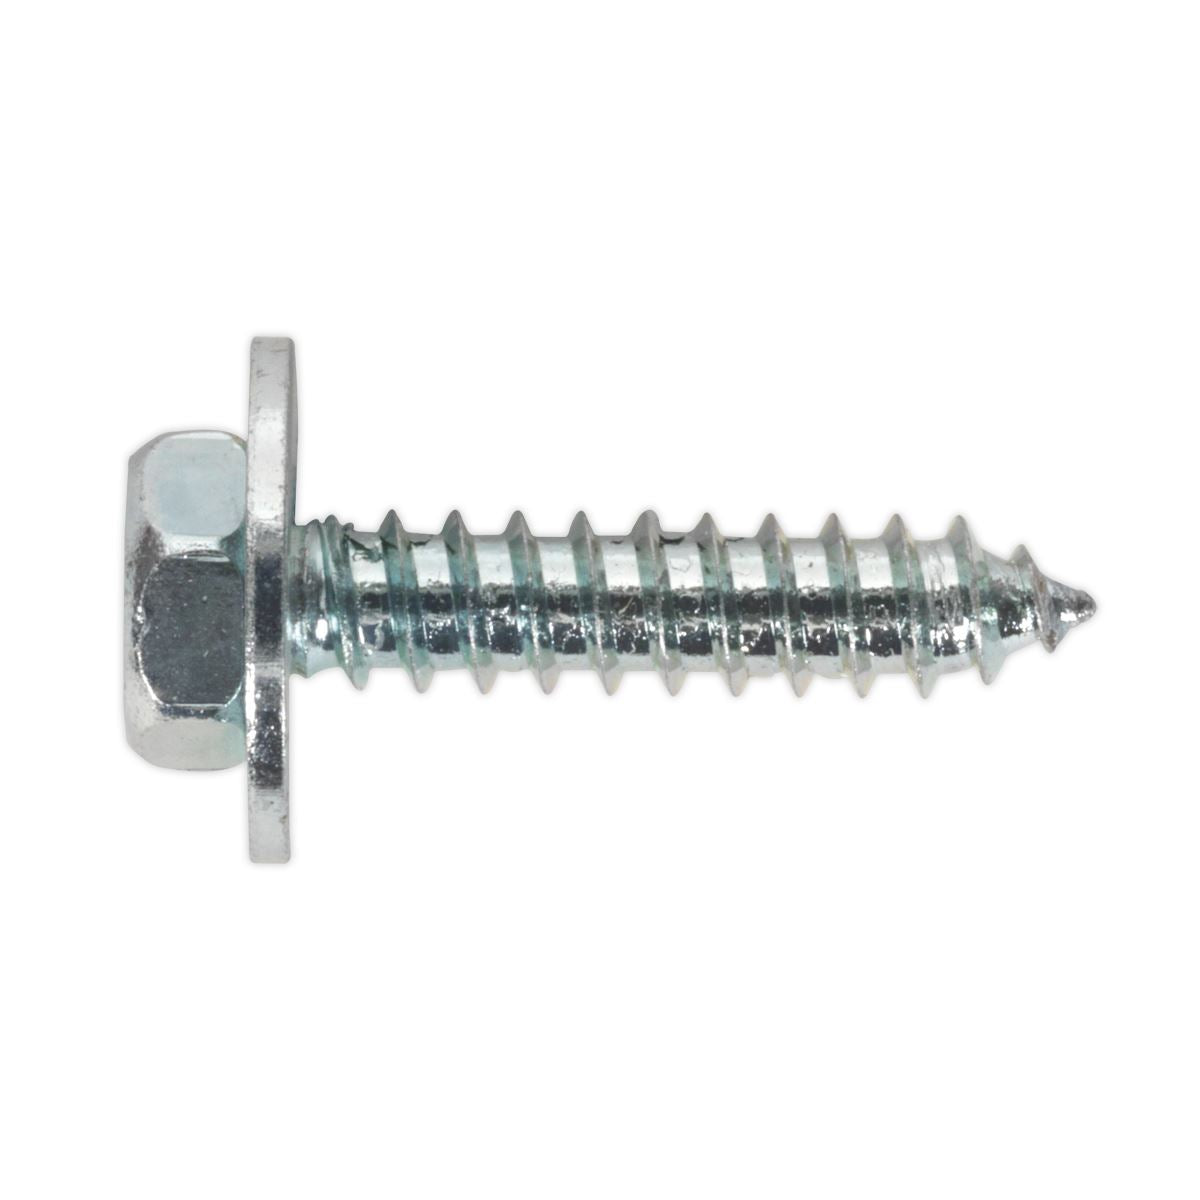 Sealey Acme Screw with Captive Washer M8 x 3/4" Zinc Pack of 100